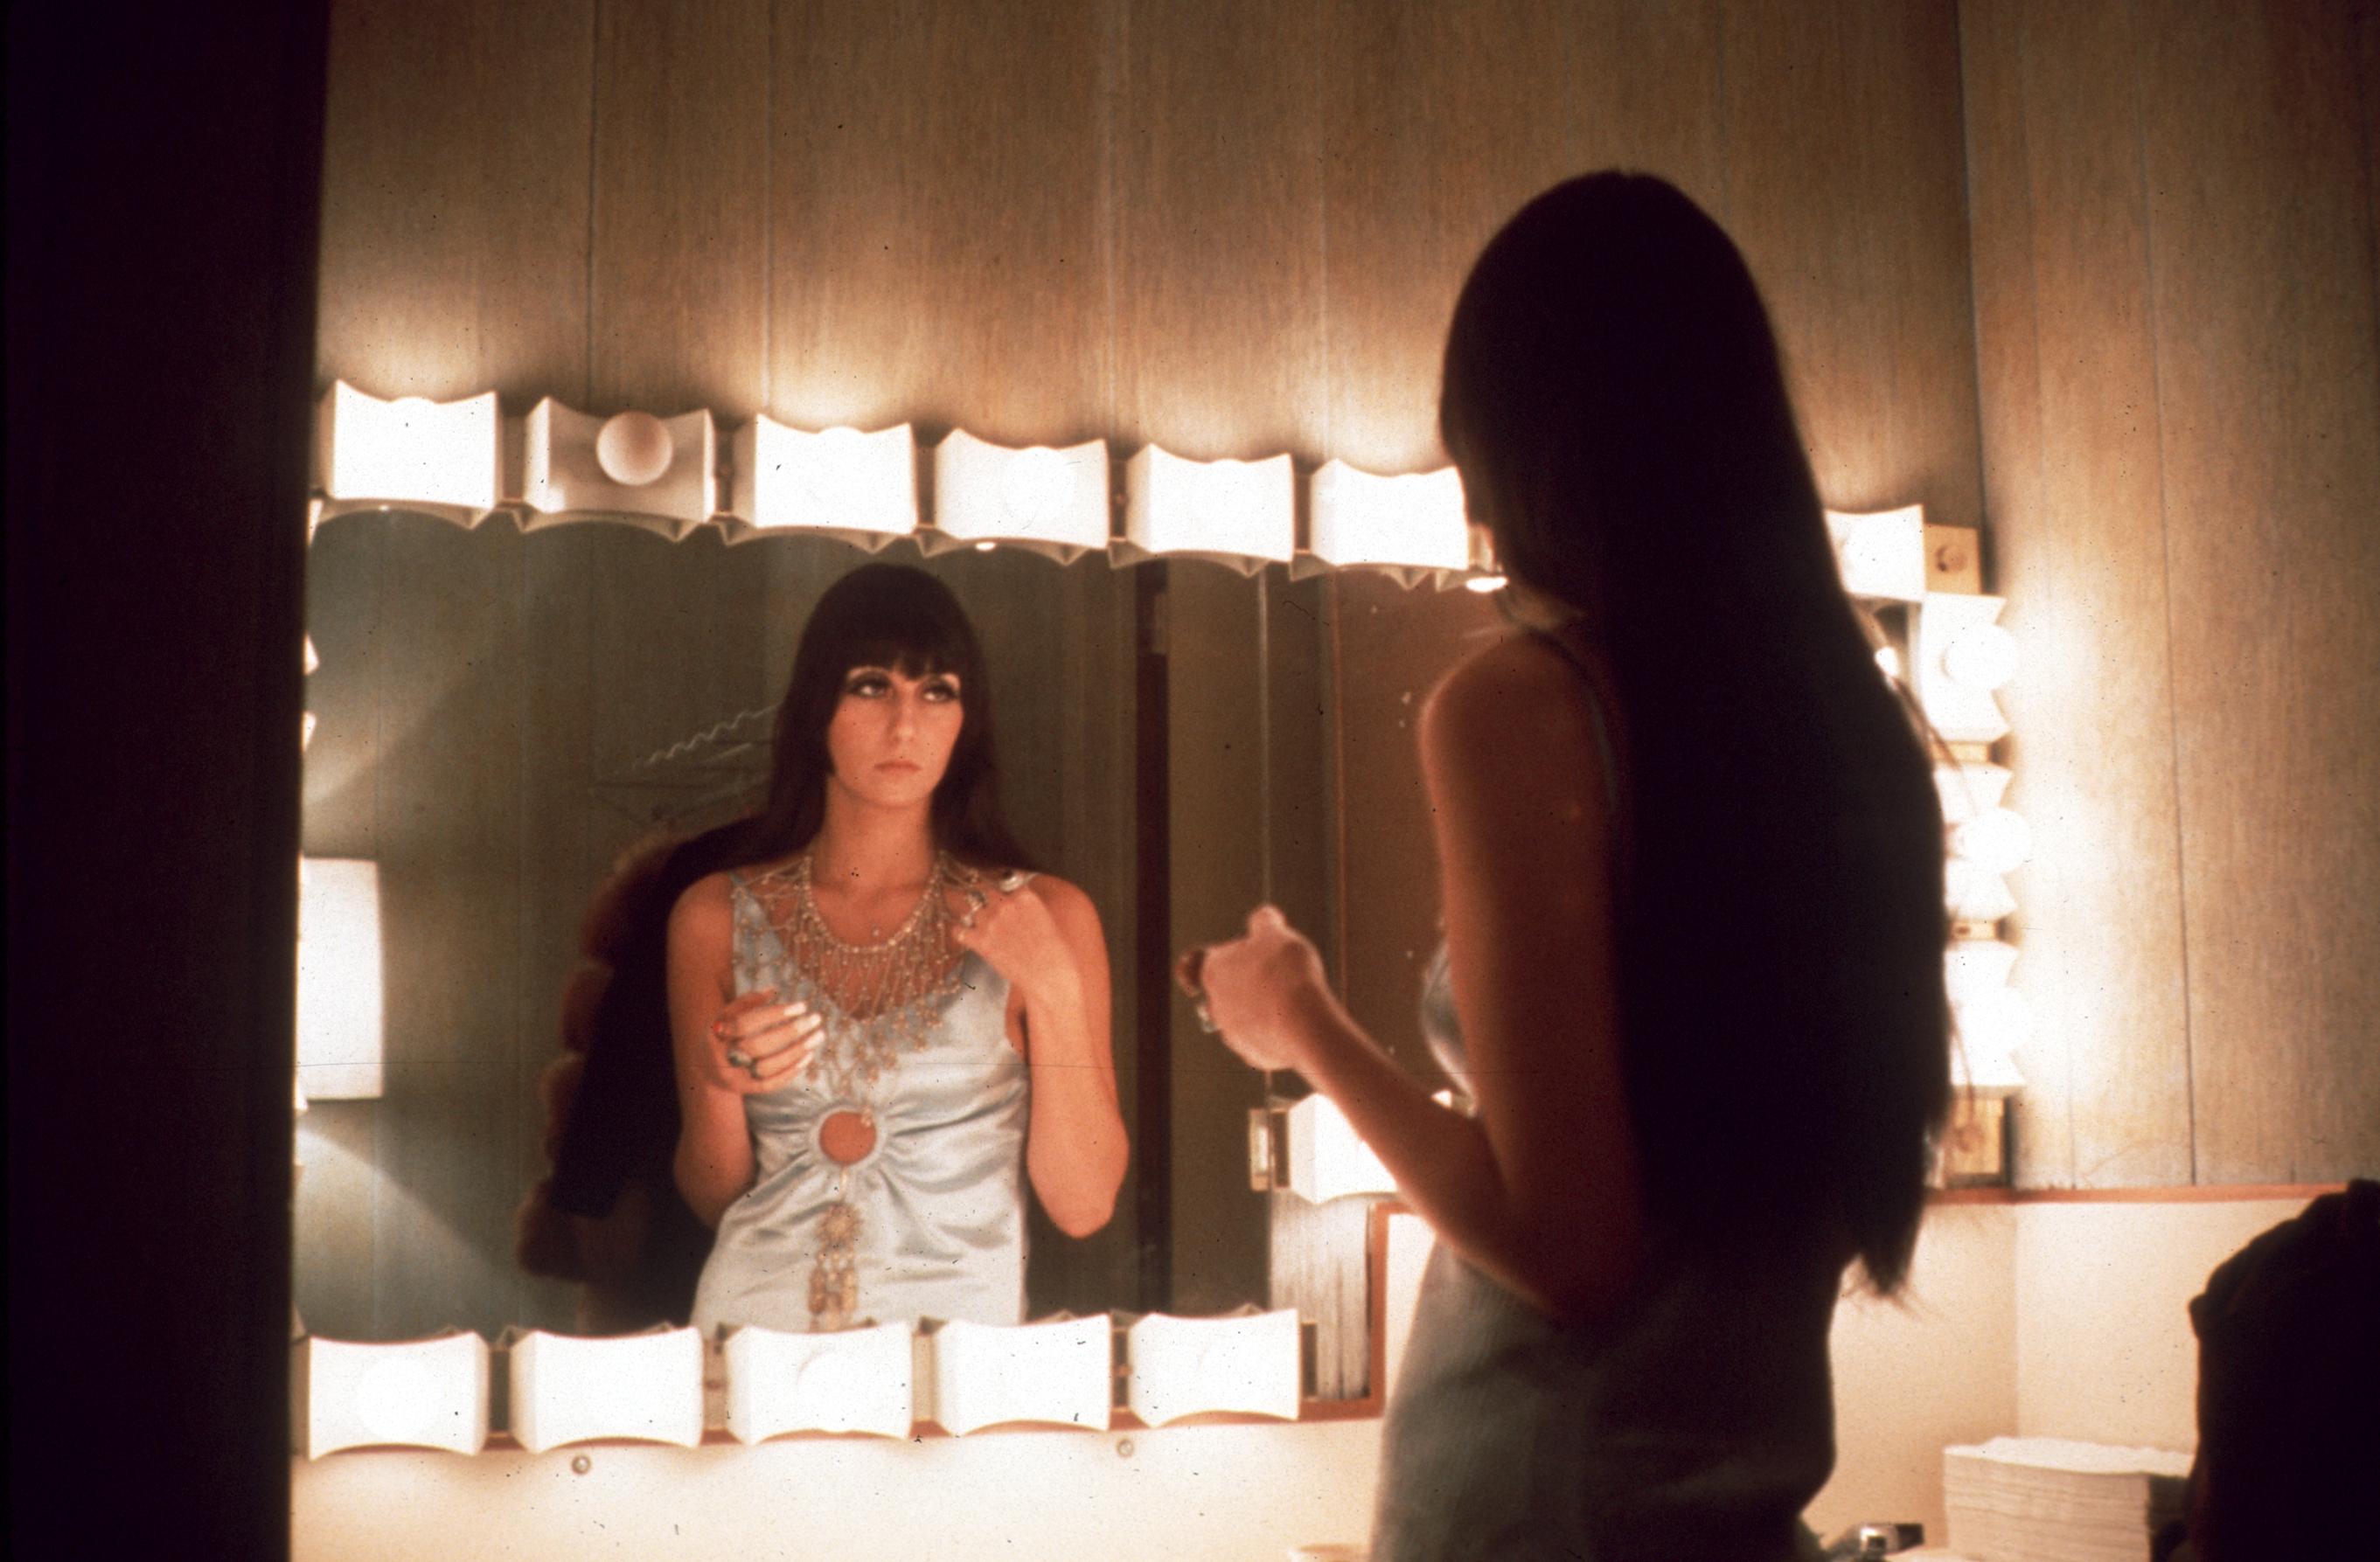 Cher at a mirror